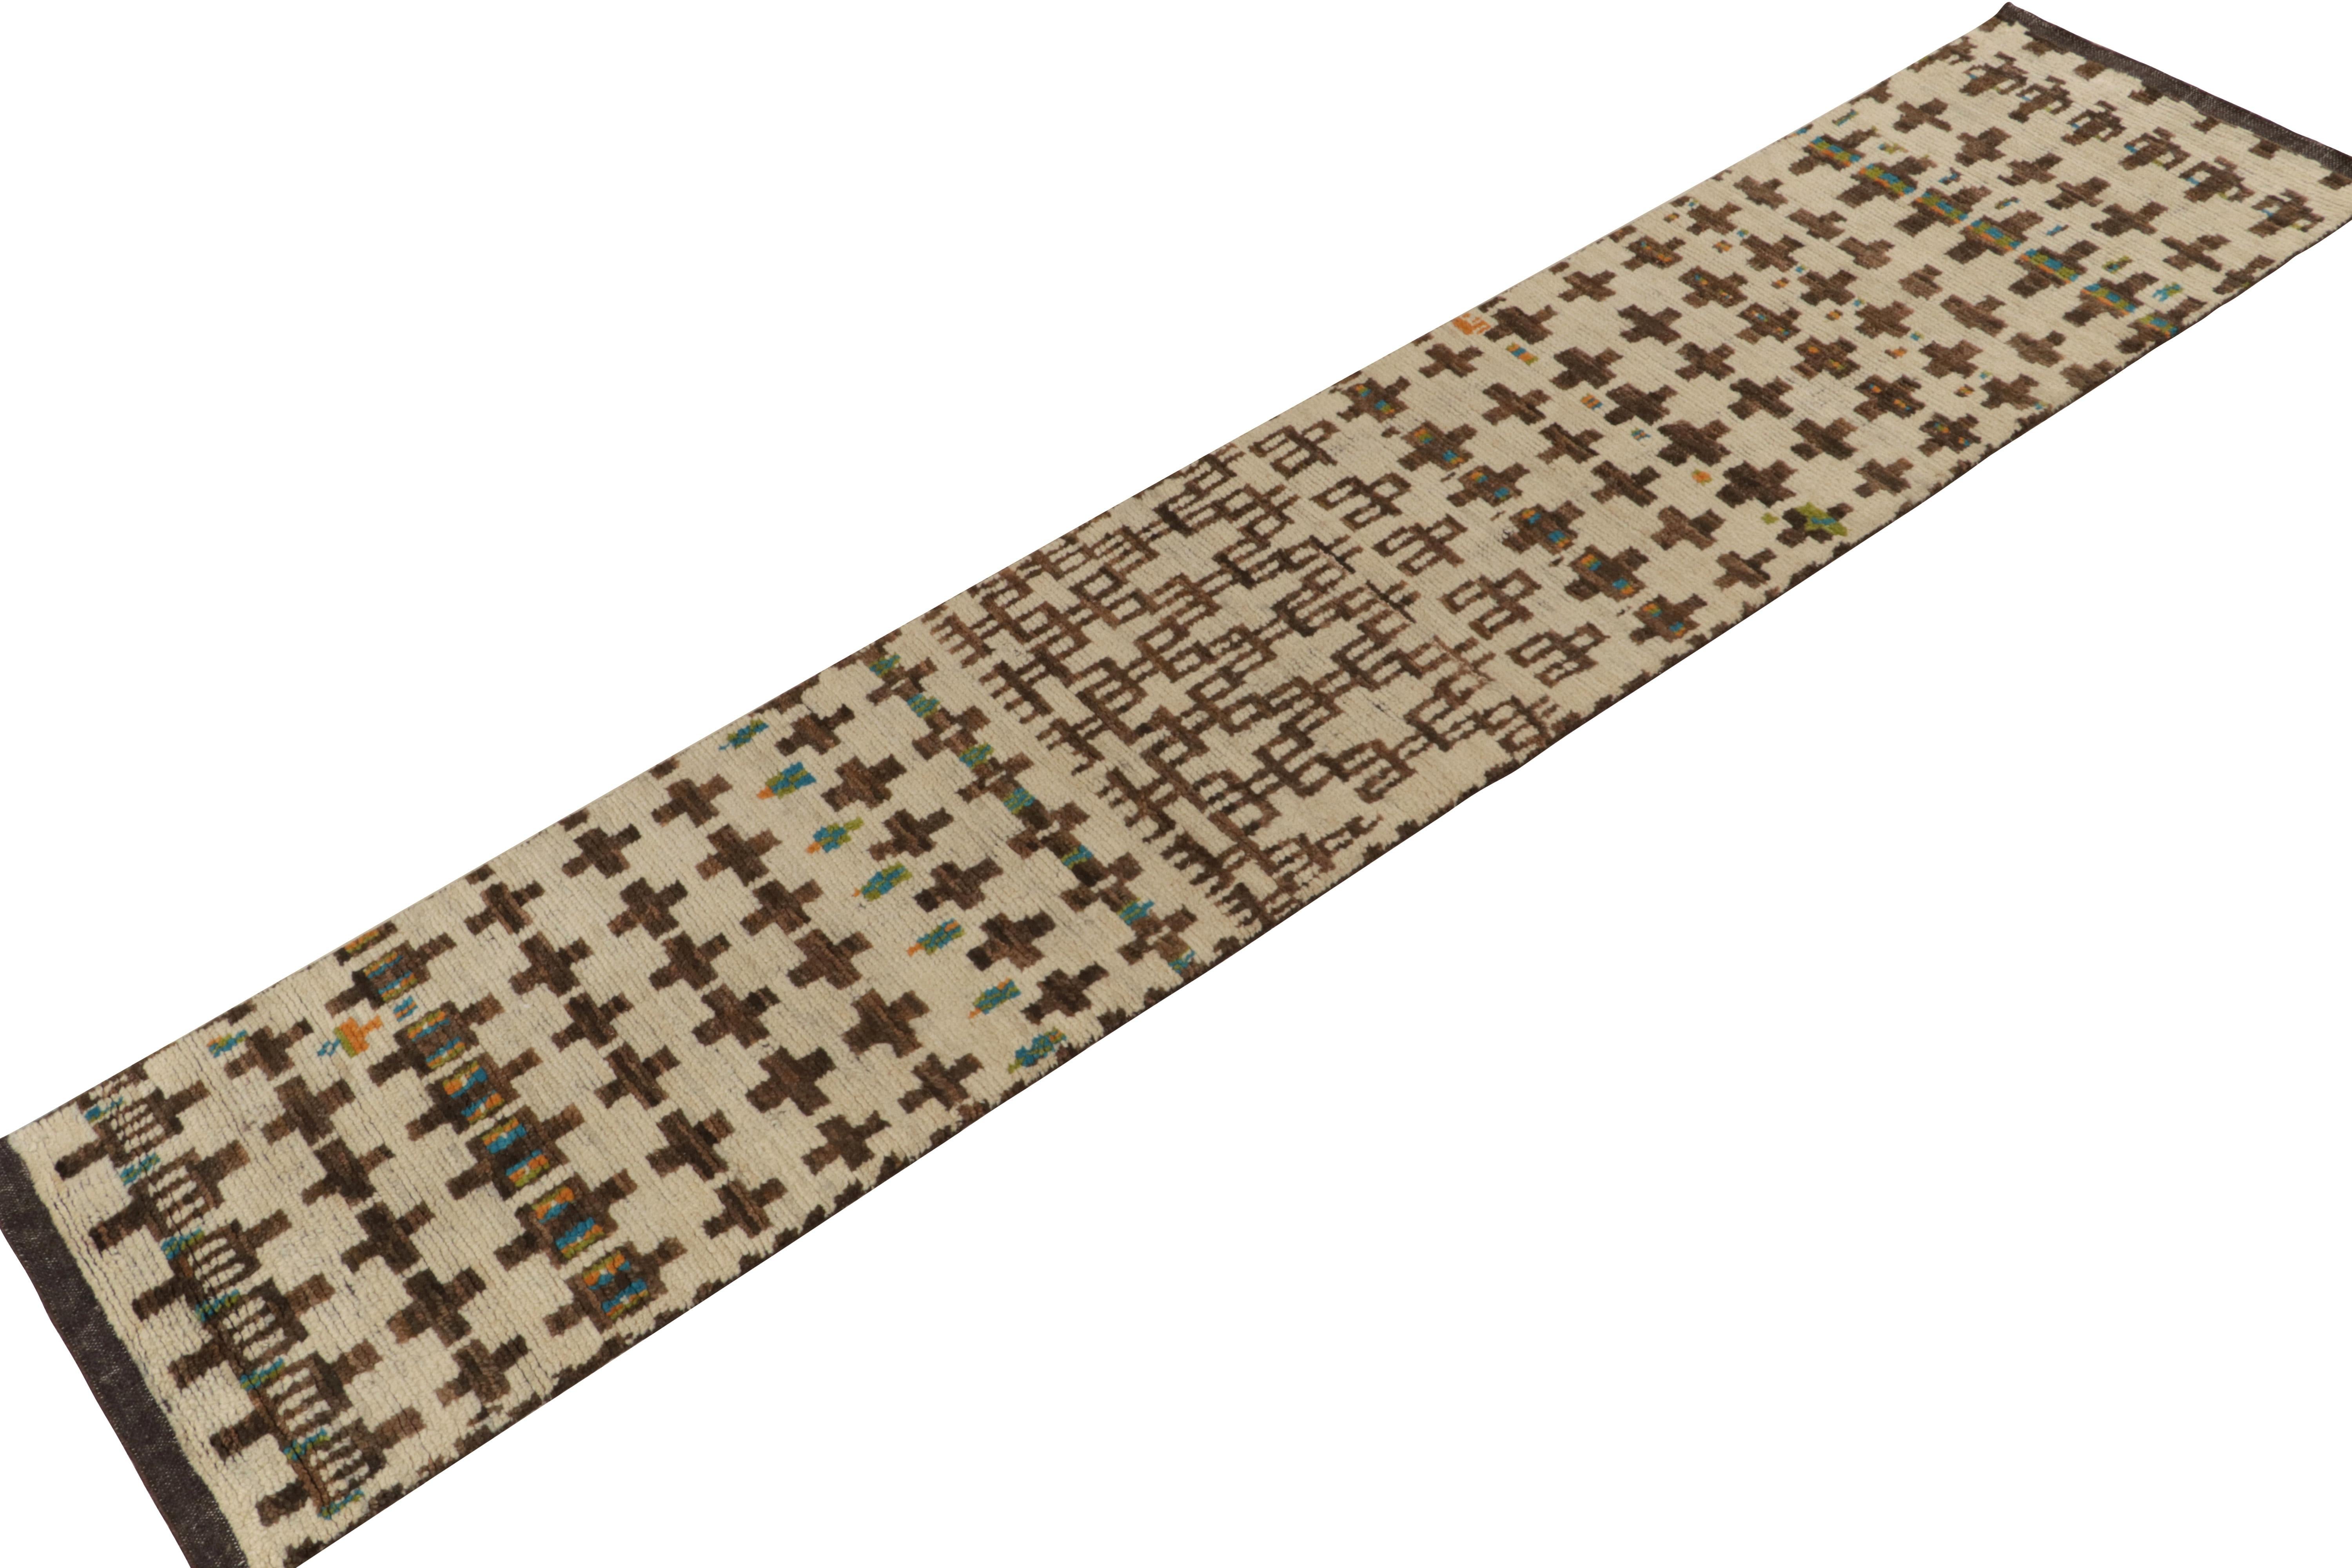 Hand-knotted in wool and silk, a 3x12 runner from Rug & Kilim’s contemporary odes to Moroccan tribal style. 

On the design: This piece enjoys an exceptional movement with cross motifs and geometric patterns in robust chocolate brown atop beige.